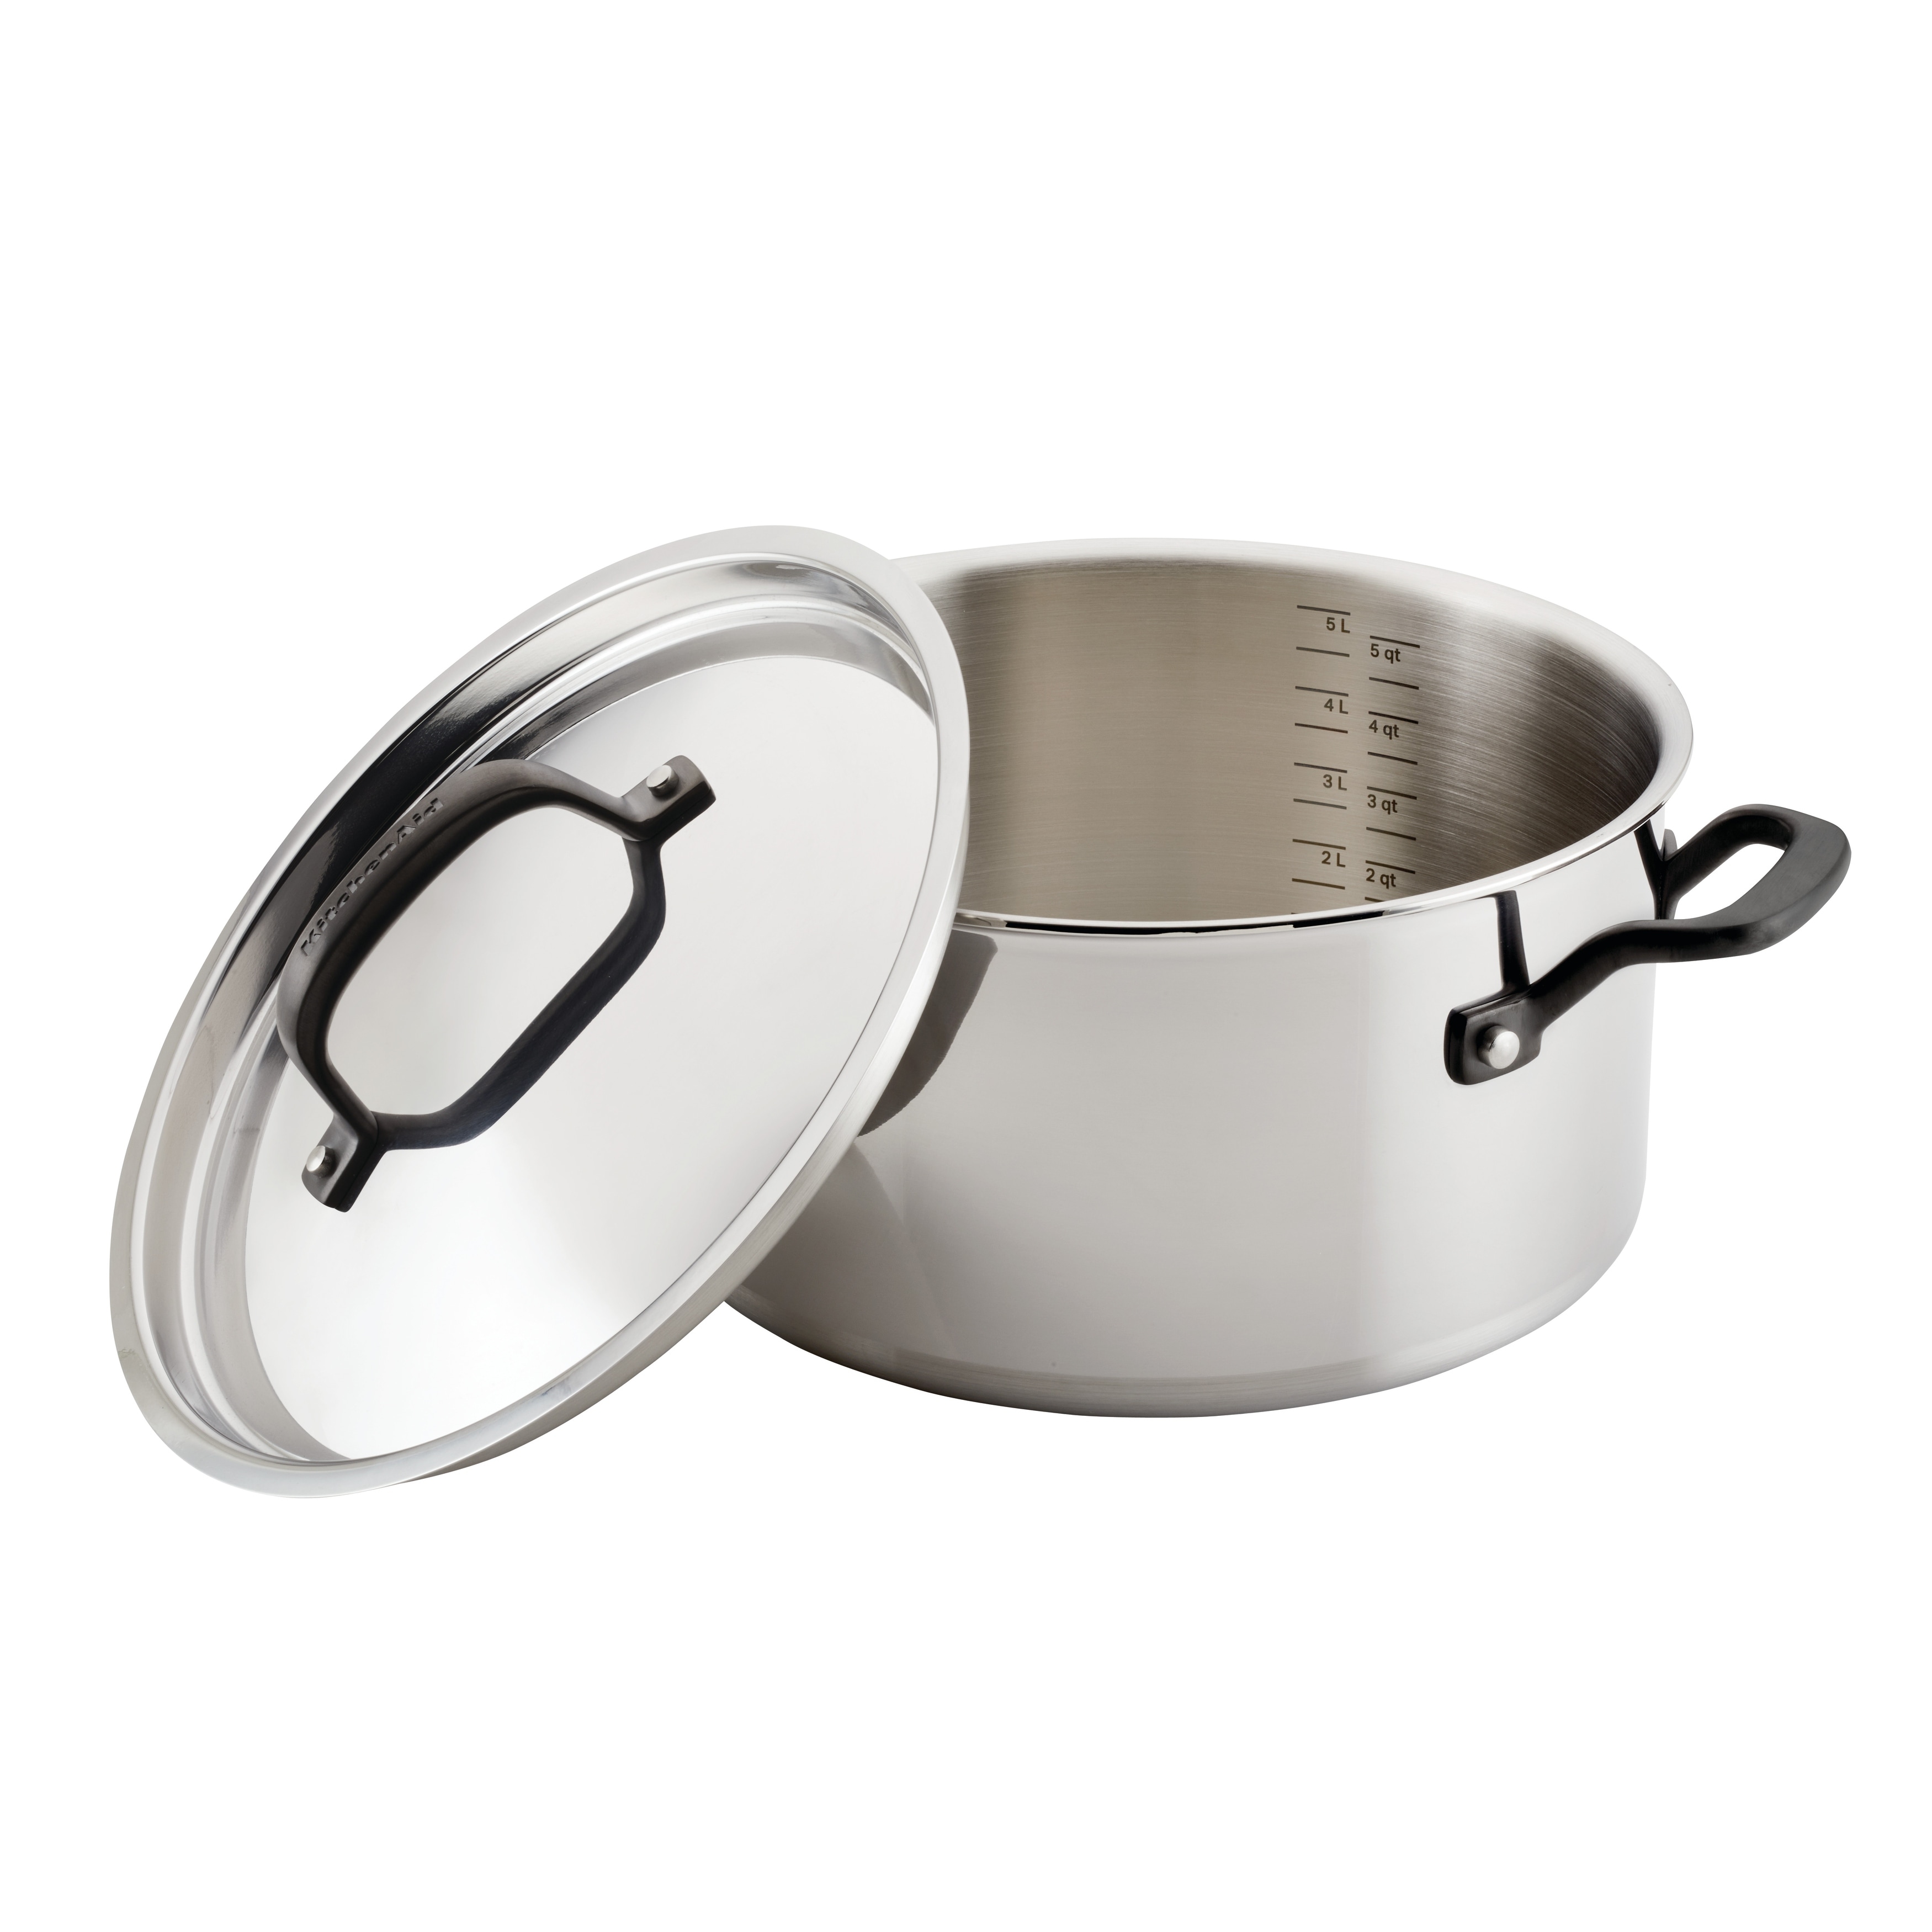 https://ak1.ostkcdn.com/images/products/is/images/direct/0238bb5941062dba38dace57ce549b8025d8bd83/KitchenAid-5-Ply-Clad-Stainless-Steel-Induction-Stockpot-with-Lid%2C-6-Quart%2C-Polished-Stainless-Steel.jpg